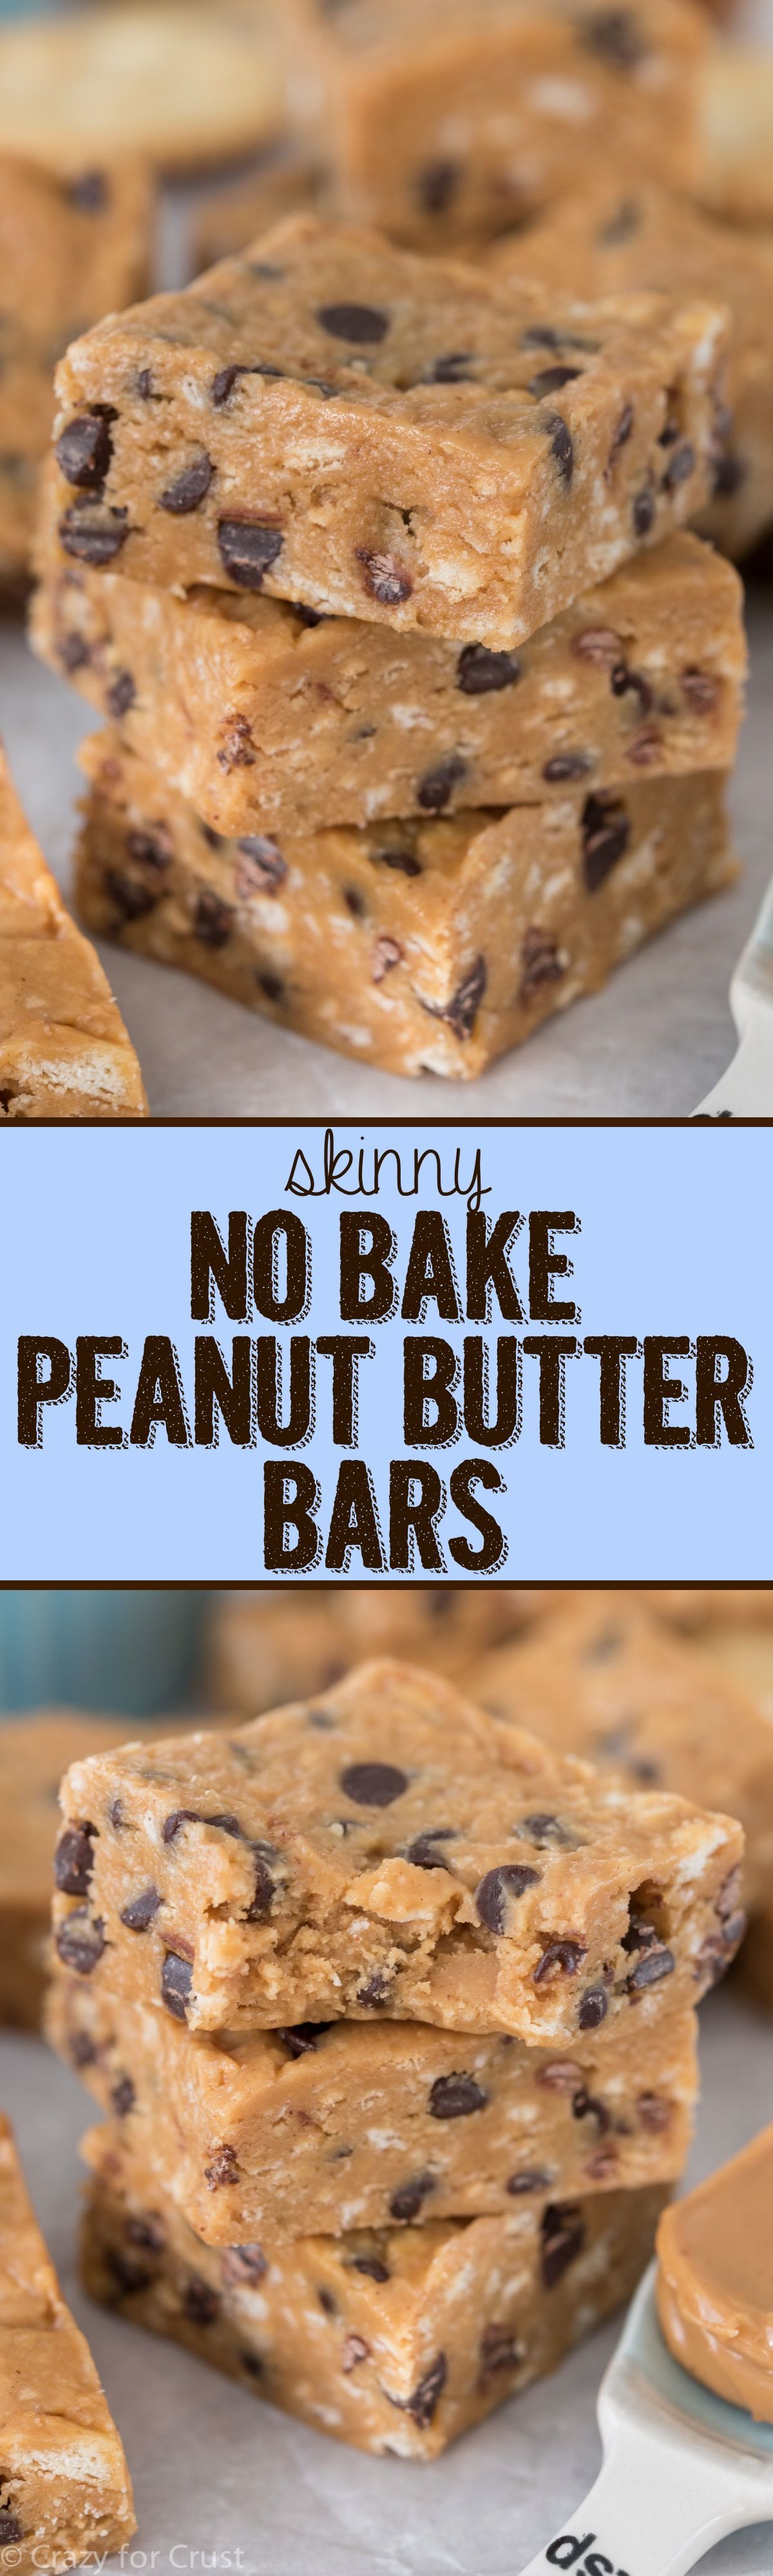 Skinny No Bake Peanut Butter Bars – this easy peanut butter bar recipe has way less calories and fat than the regular version and